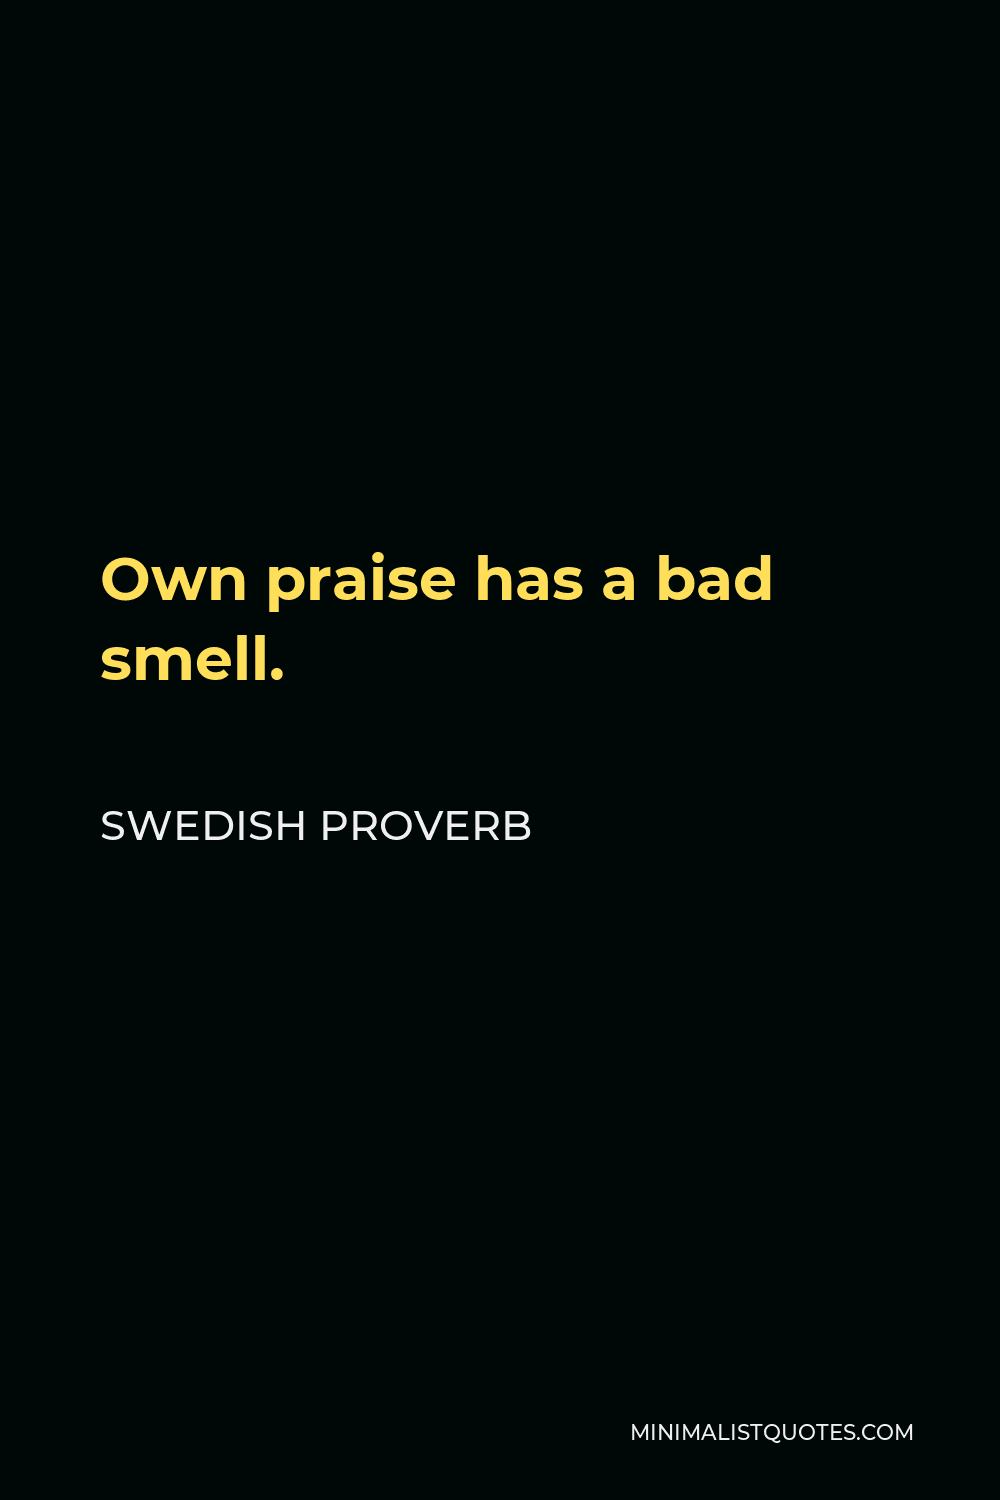 Swedish Proverb Quote - Own praise has a bad smell.